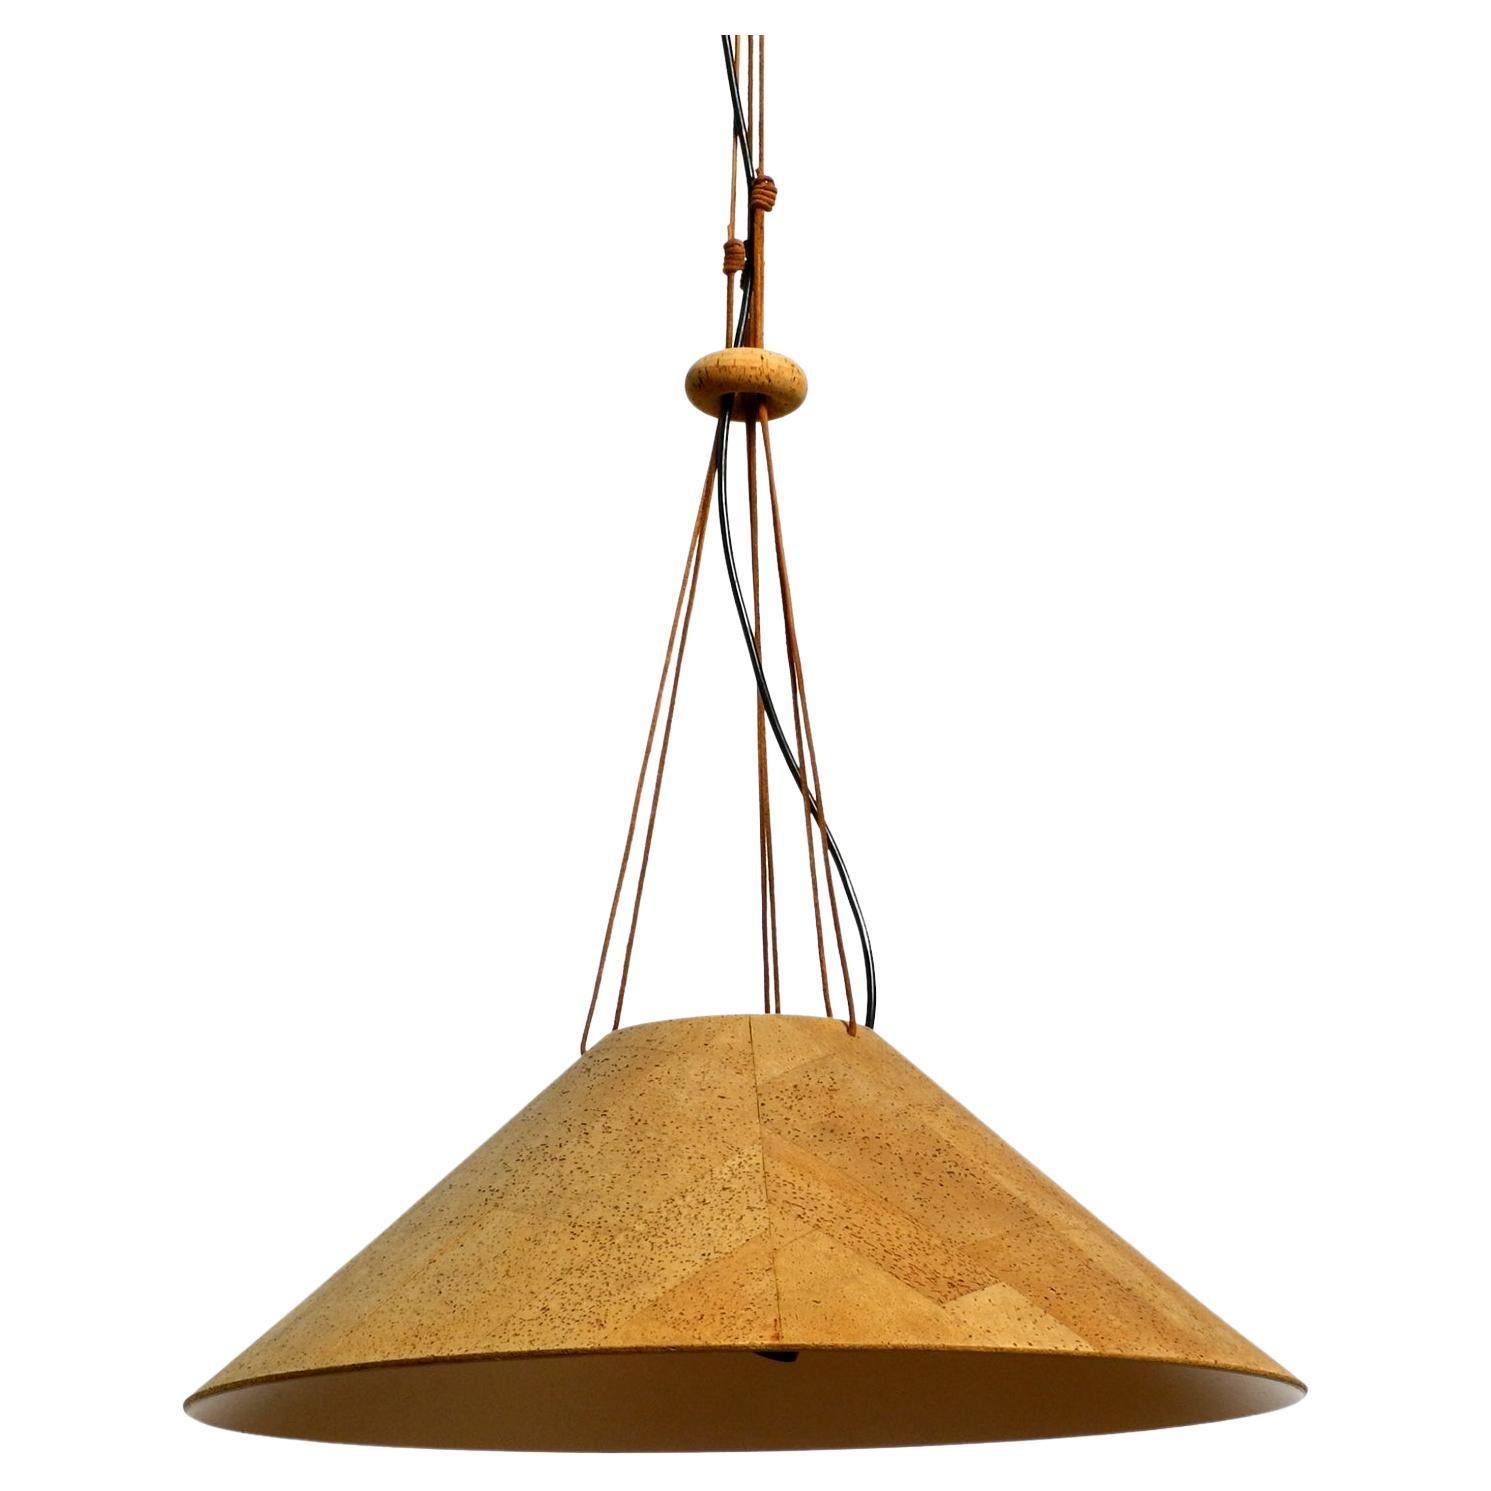 Large 70s Cork Ceiling Lamp by M-Design Design Willhelm Zanoth and Ingo Maurer For Sale